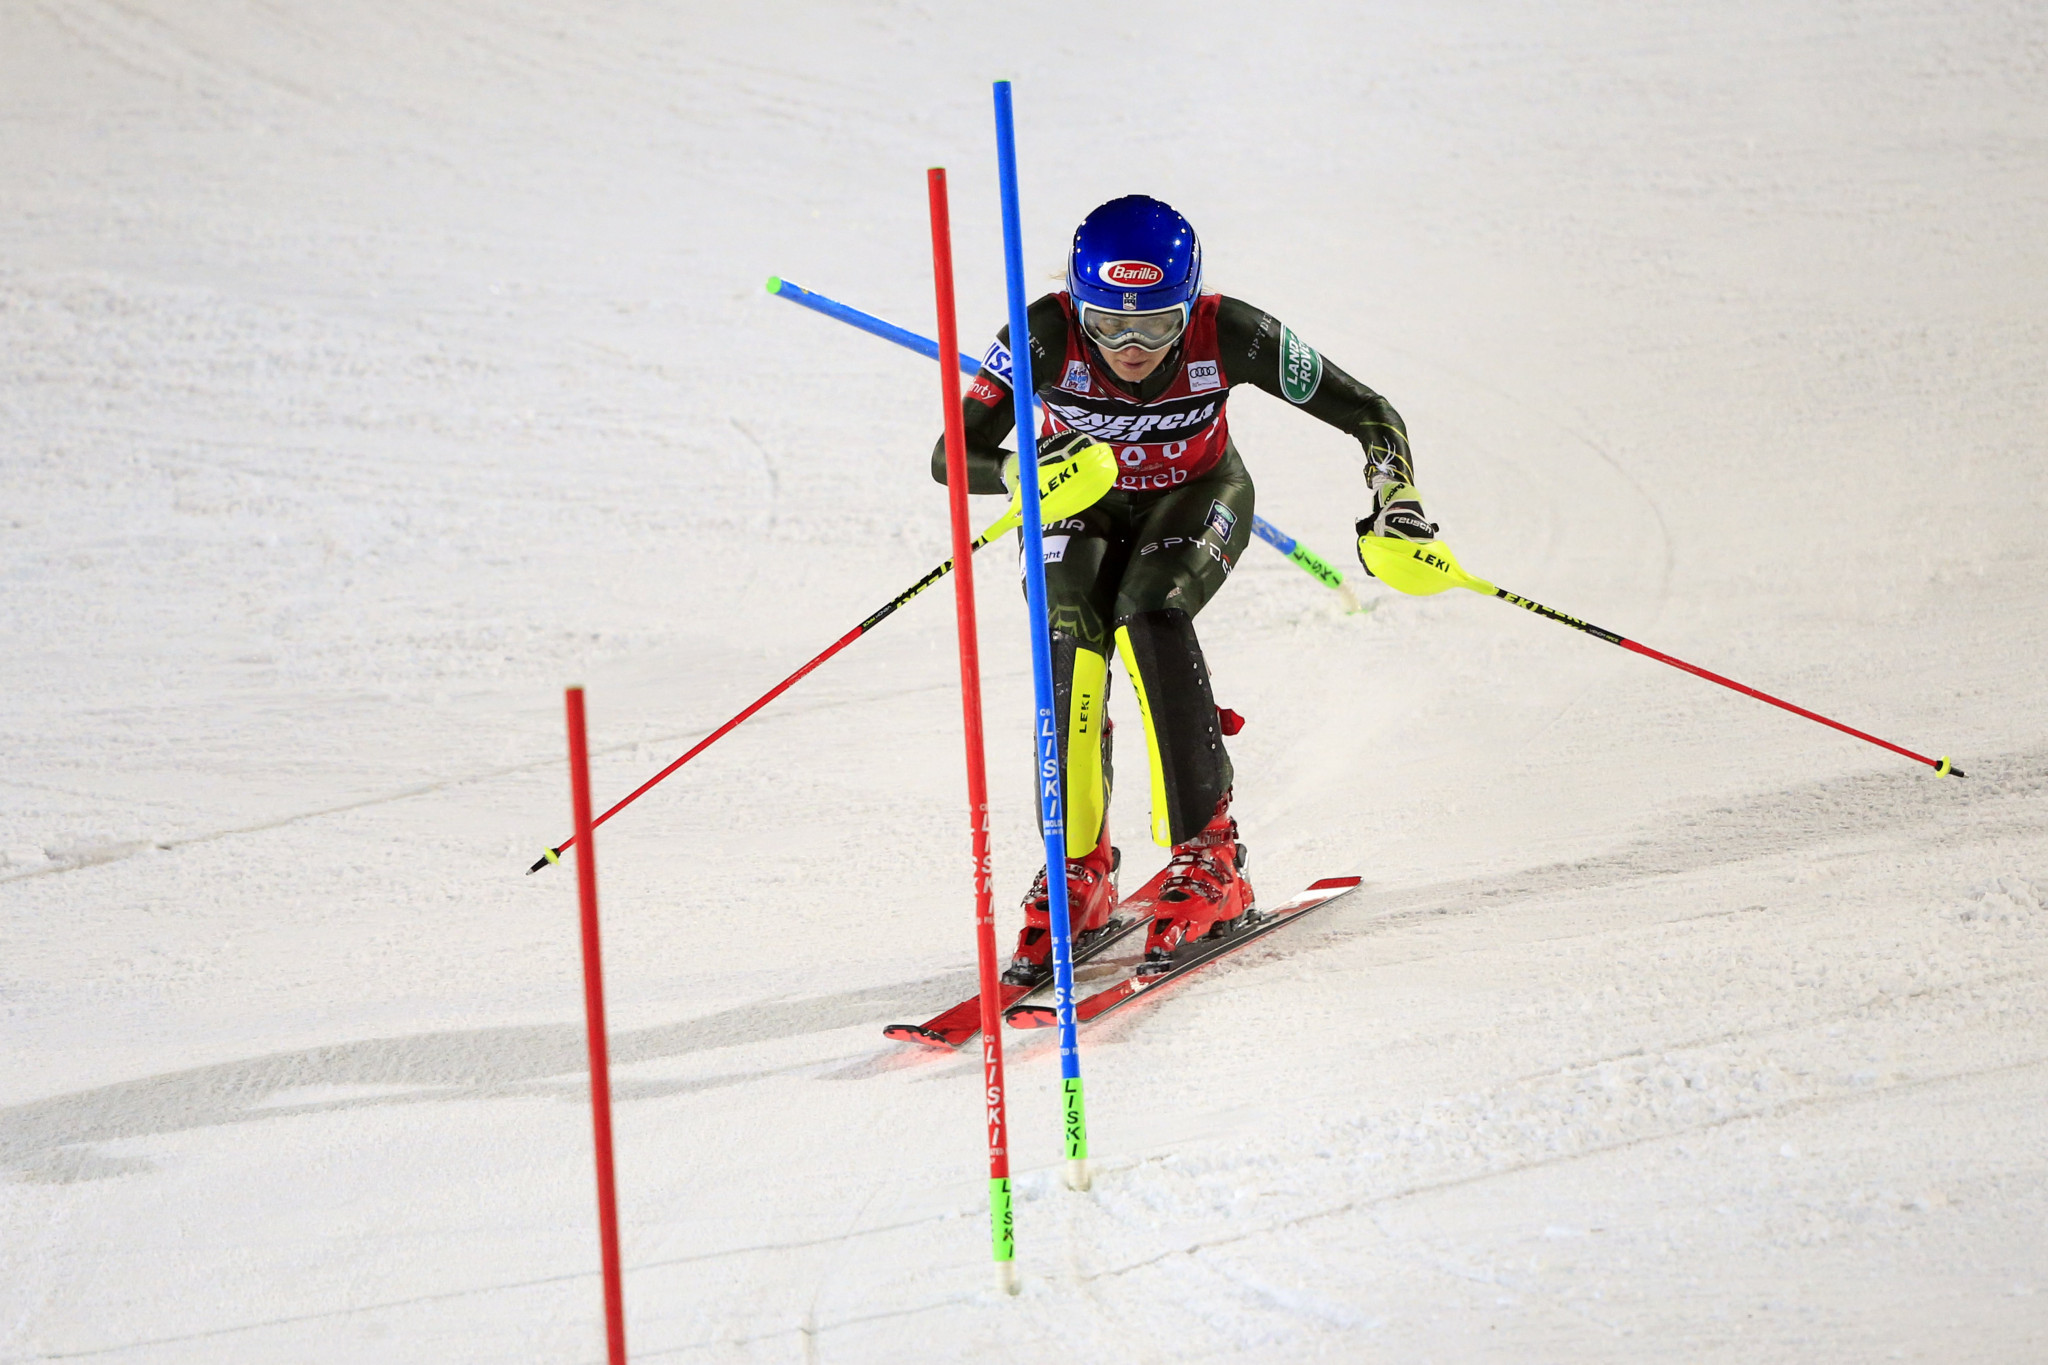 Mikaela Shiffrin was named female athlete of the month for December ©Getty Images